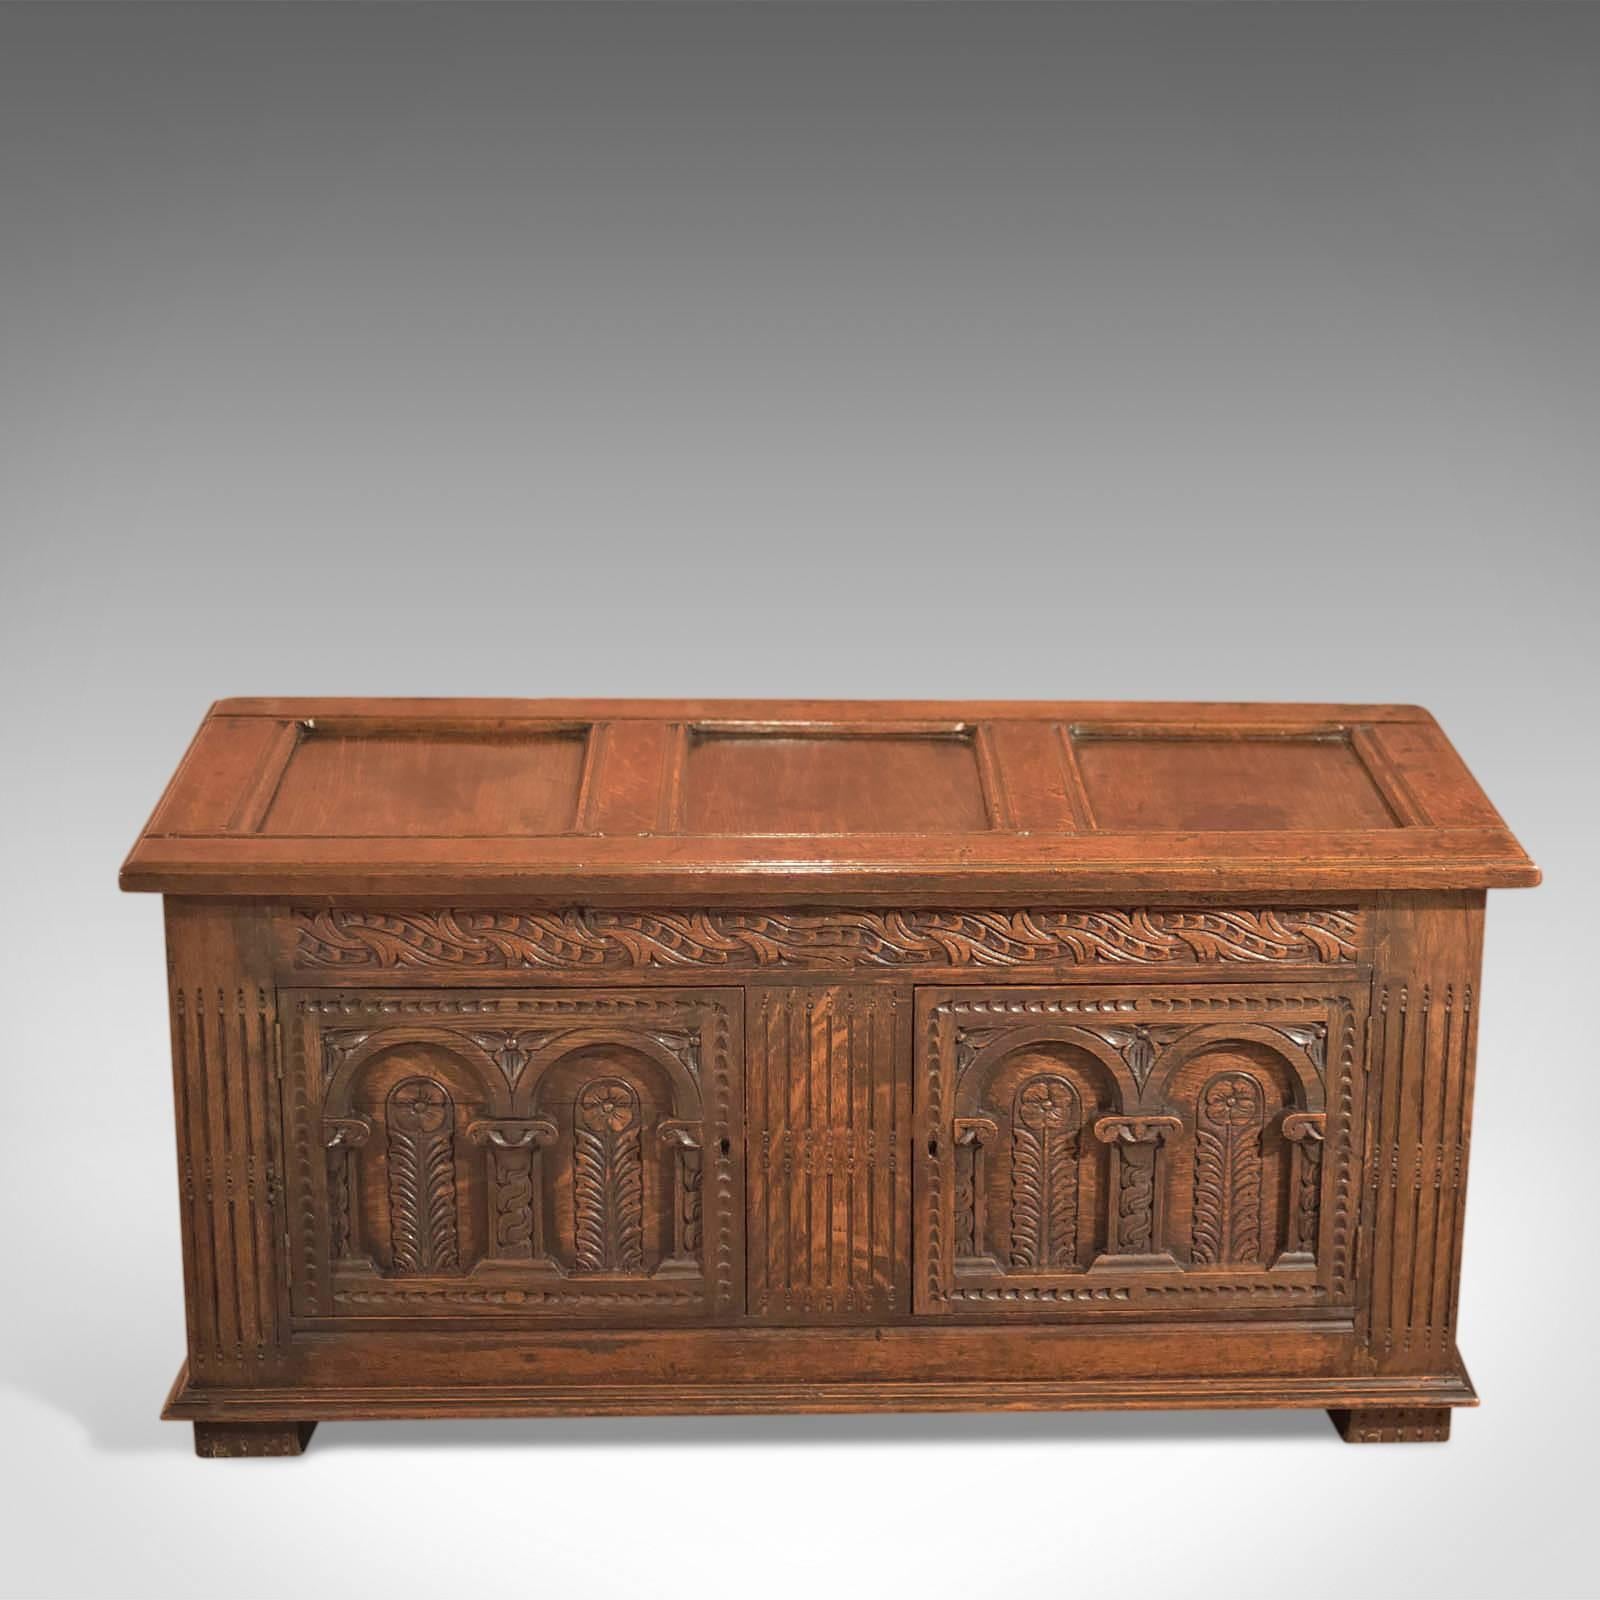 This is an antique coffer dating to the early 18th century.

The fluted stiles extend through the skirt moulding to the floor forming feet and raising the coffer a couple of inches from the ground.

Sitting below a reciprocating carved frieze